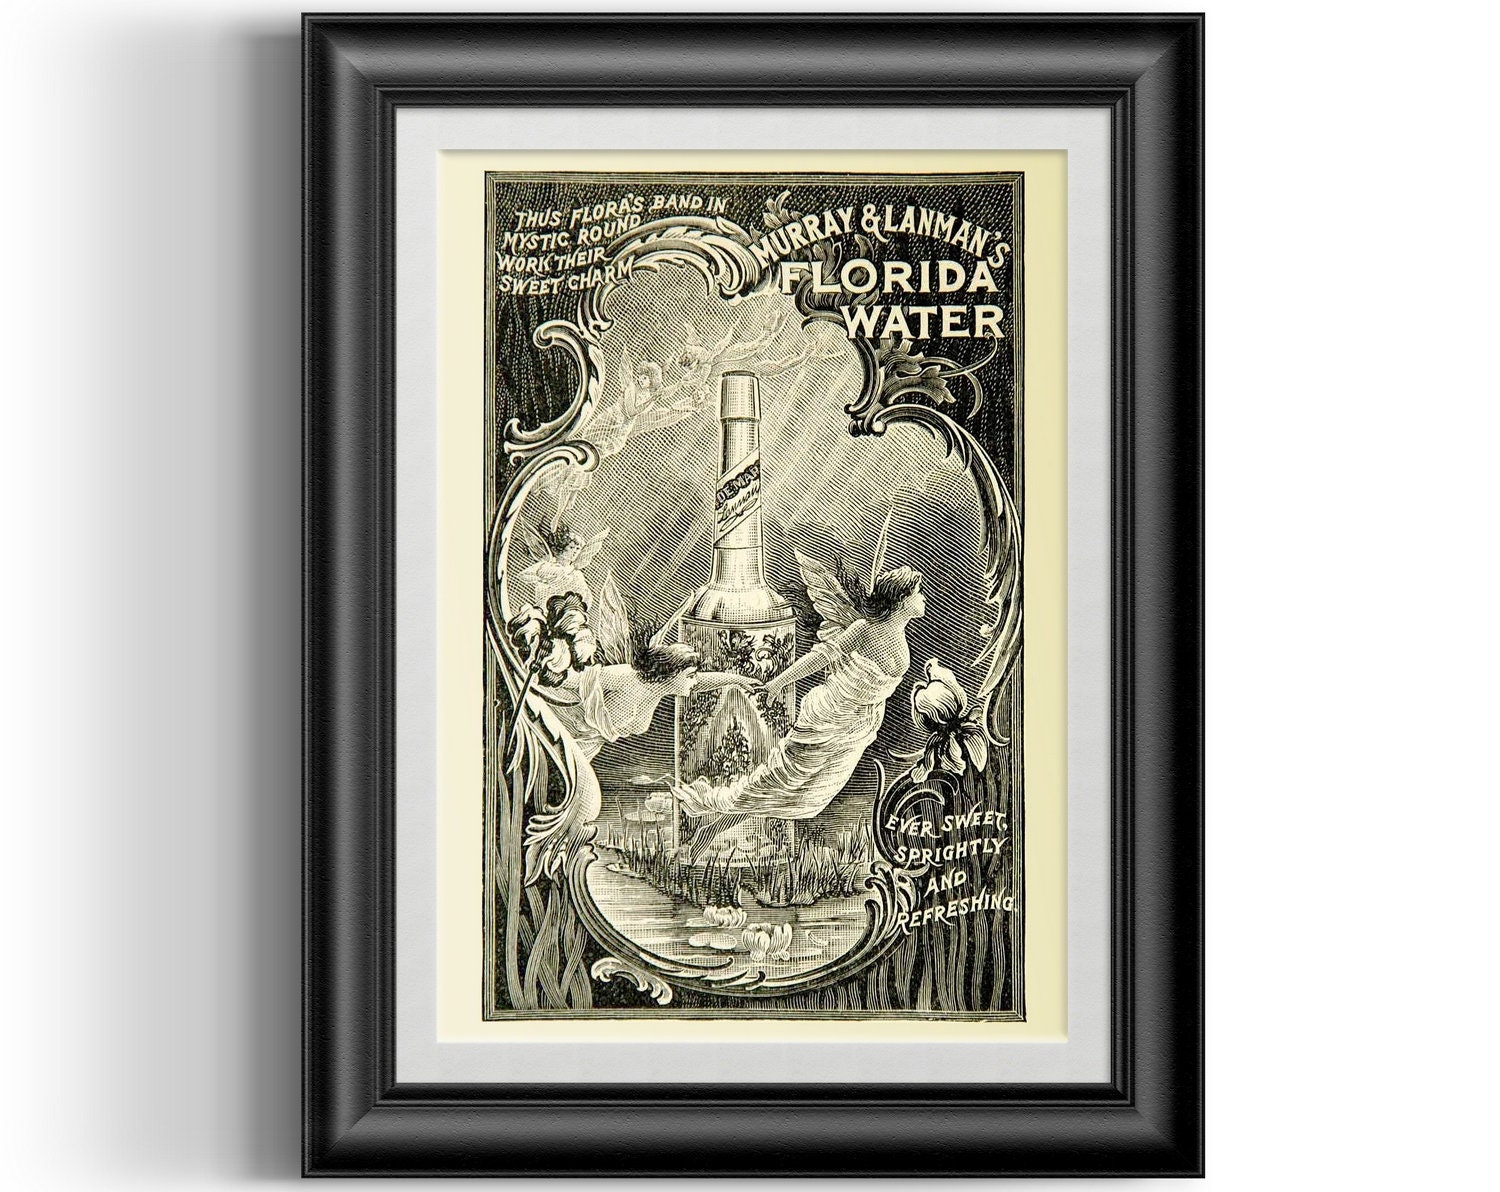 'Murray & Lanman's Florida Water c1904' A Beautiful A4 Glossy Art Print Taken From a Vintage Product ad 